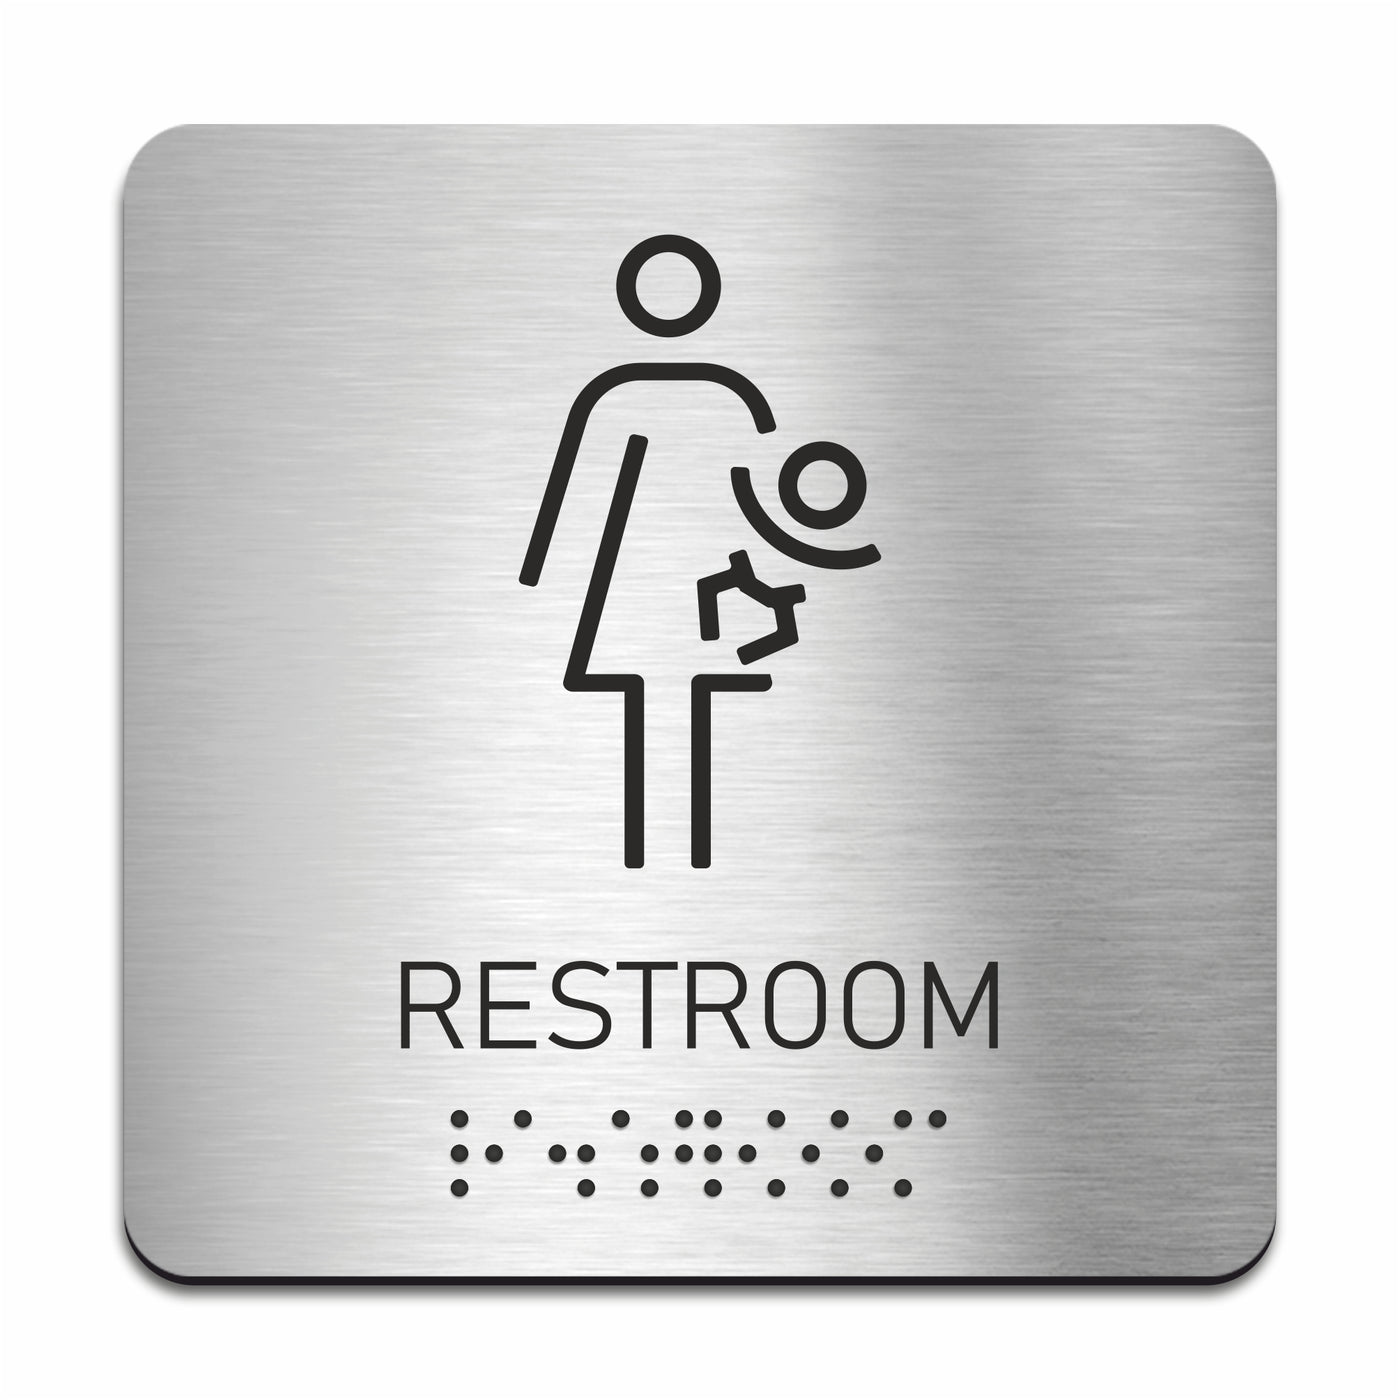 Lactation Room Sign with Braille - Acrylic & Stainless Steel